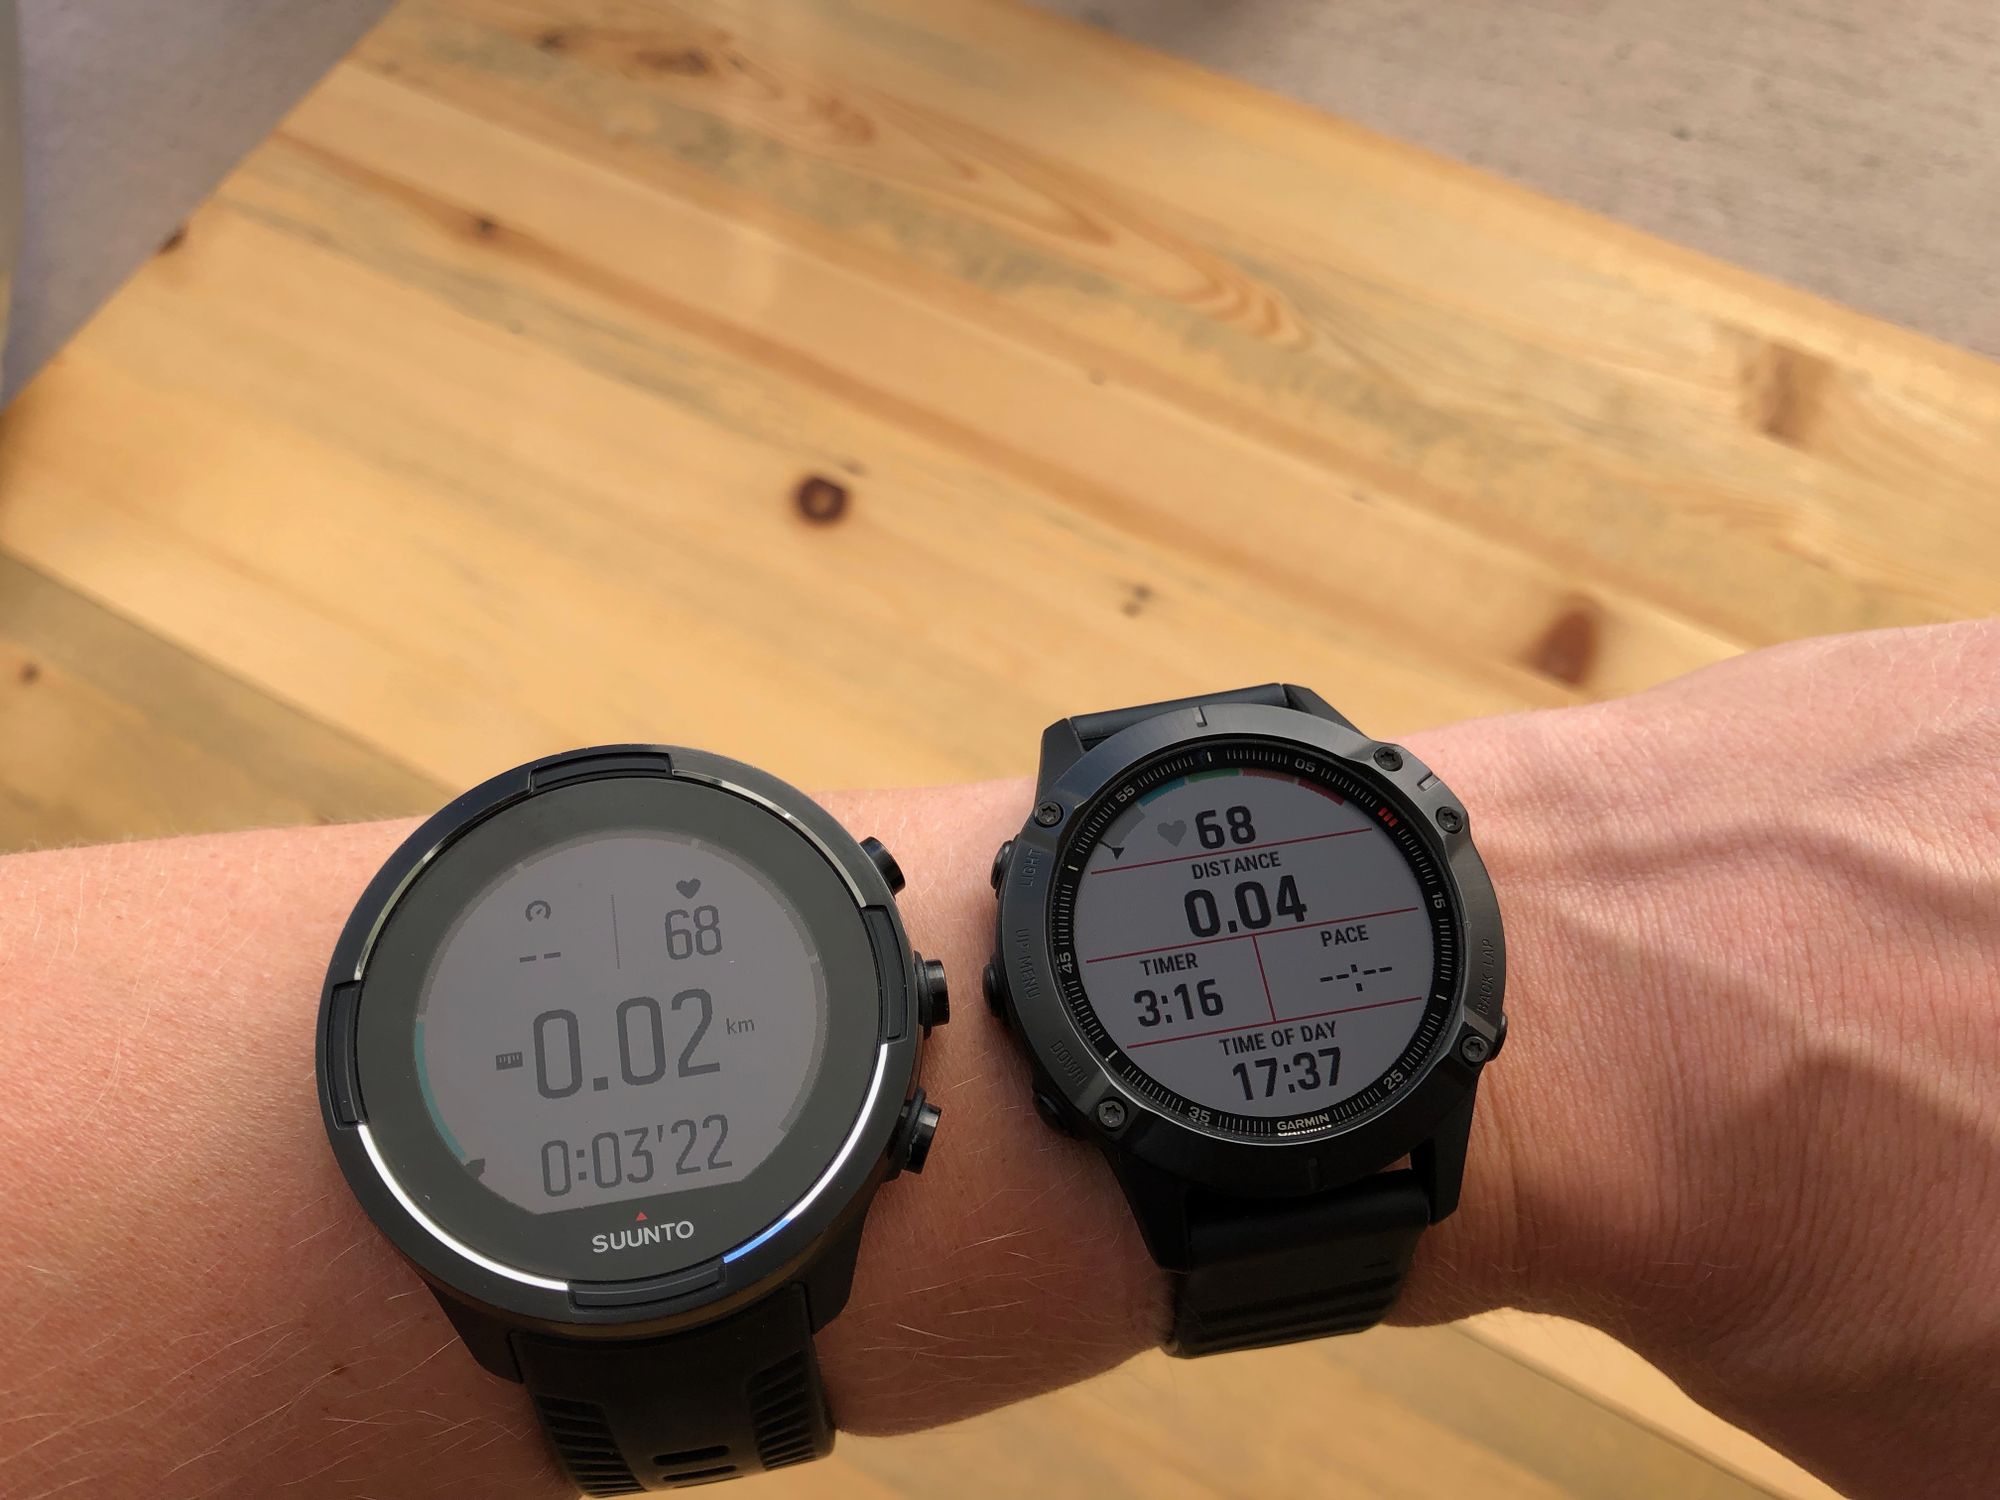 The Fenix 6 screen has more contrast in sunlight than the Suunto 9